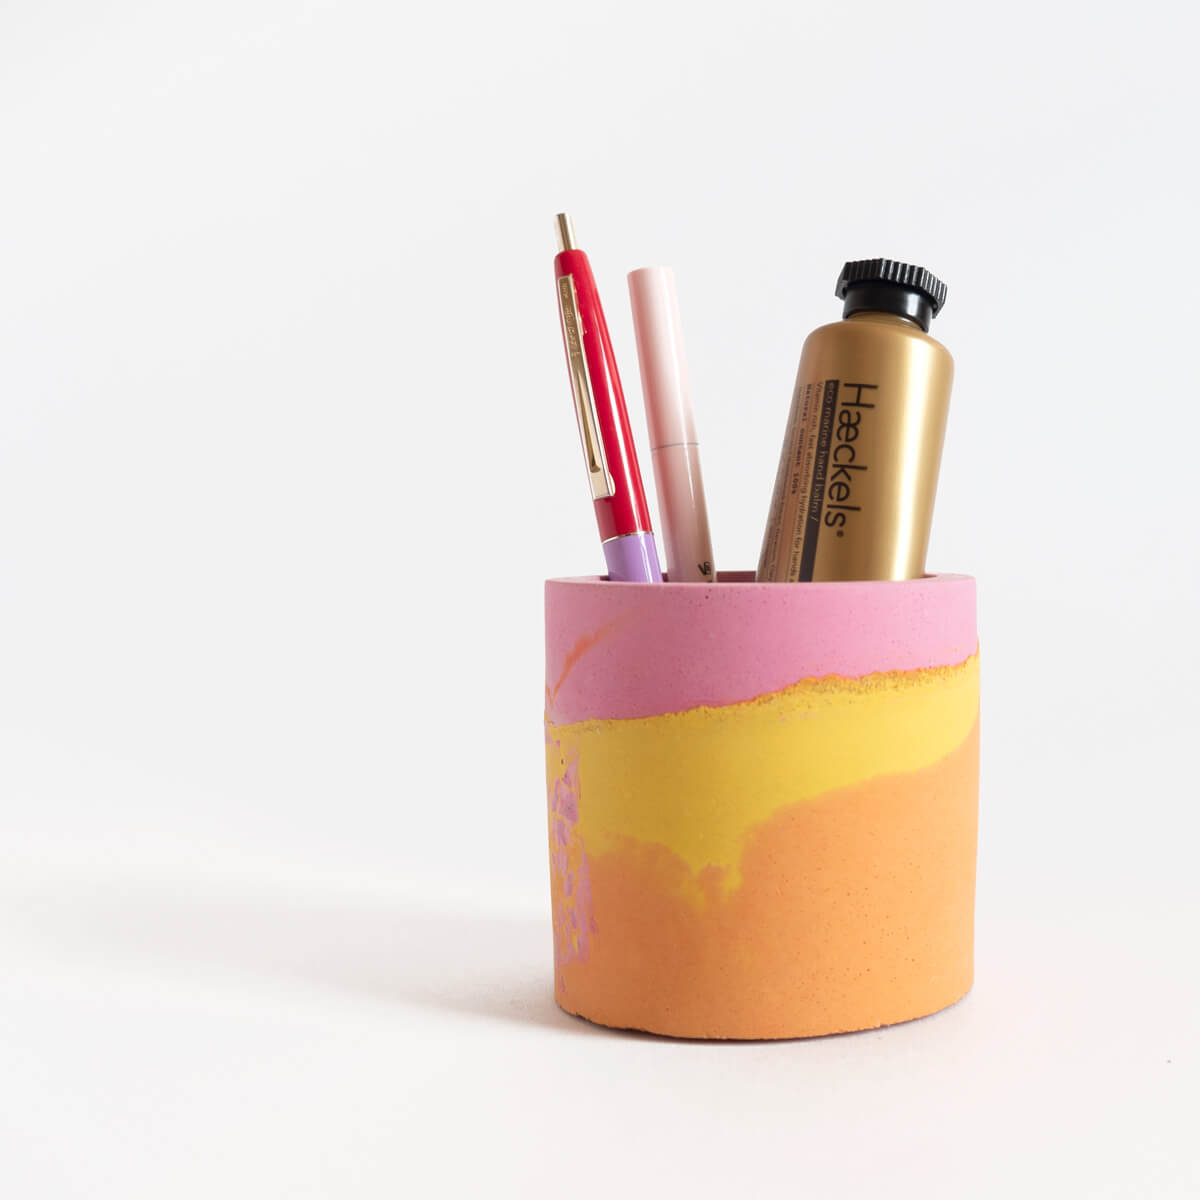 Small Round Concrete Planter, Pink and Orange | Curious Makers